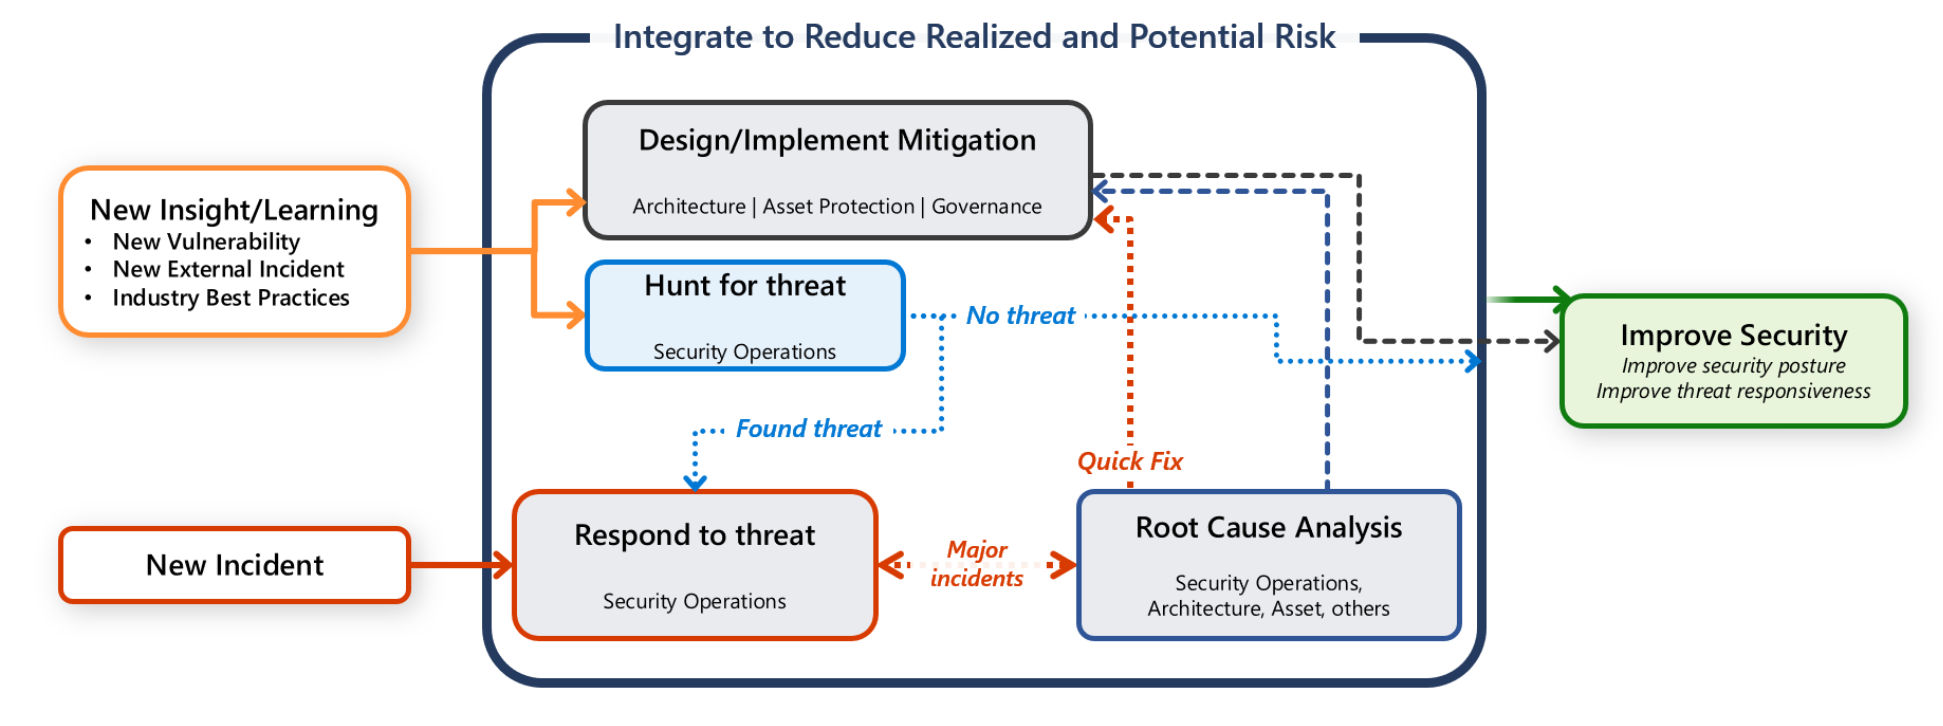 Using an Incident-Focused Model for Information Security Programs